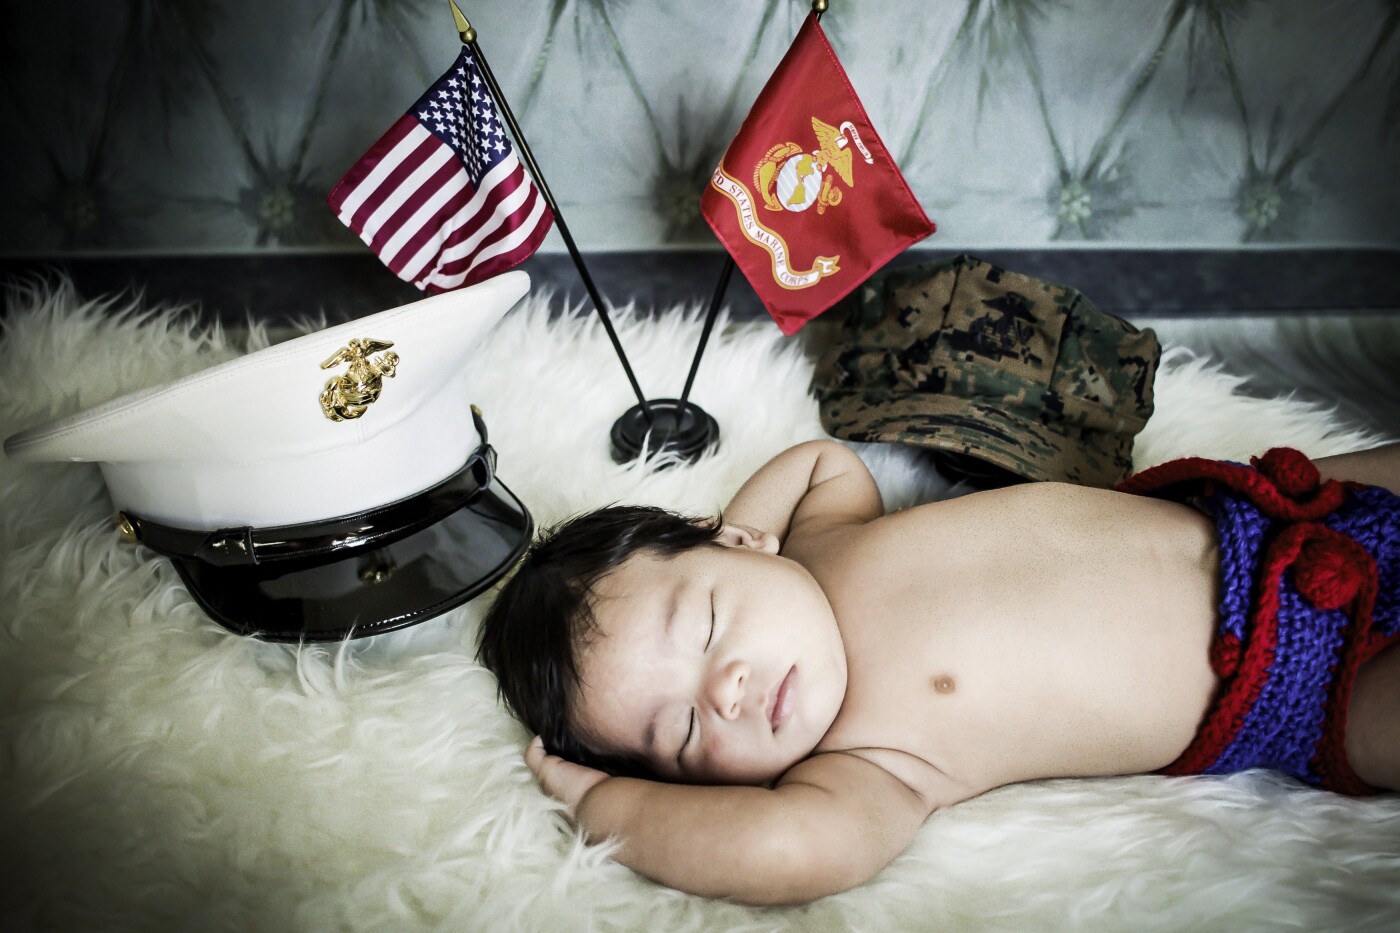 This photo of Andrew was taken to honor his father, a retired United States Marine who has returned safely after a couple of tours of duty.  When his mother and I were planning Andrew's session, I had a special US Marine inspired diaper cover made while his mom gathered her husband's uniform and accessories. It was truly a humbling and emotional session on a very hot summer day in my studio.